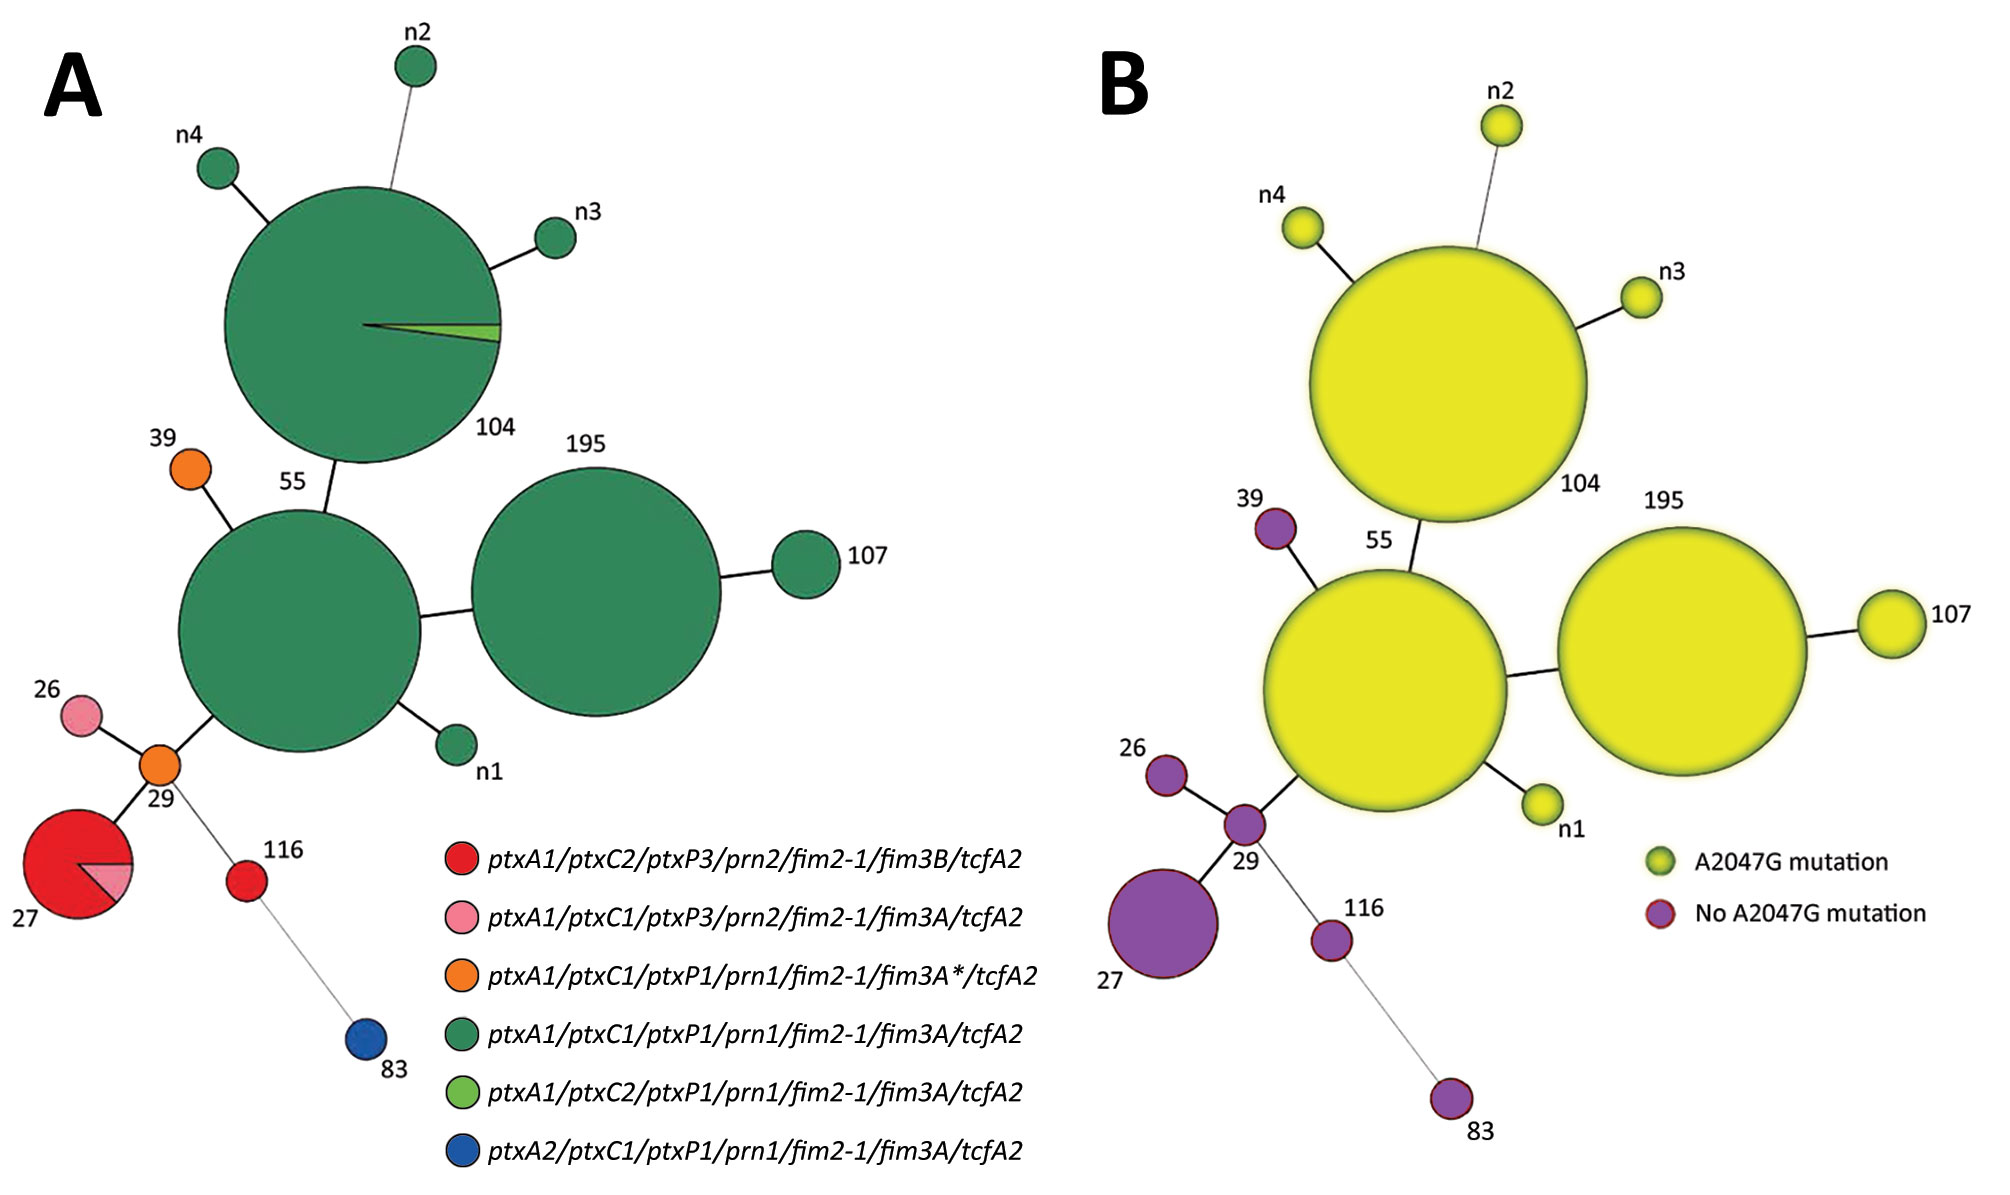 Minimum spanning tree of multilocus variable-number tandem-repeat analysis (MLVA) types of 150 Bordetella pertussis isolates collected in China, 2014–2016. Each circle represents an MLVA type, with the number next to the circle. Circle sizes are proportional to the number of isolates belonging to the particular MLVA type. A) Allelic profiles. Circle colors indicate the diﬀerent allelic profiles of vaccine antigen genes and different erythromycin sensitivities. B) Presence or absence of A2047G mu